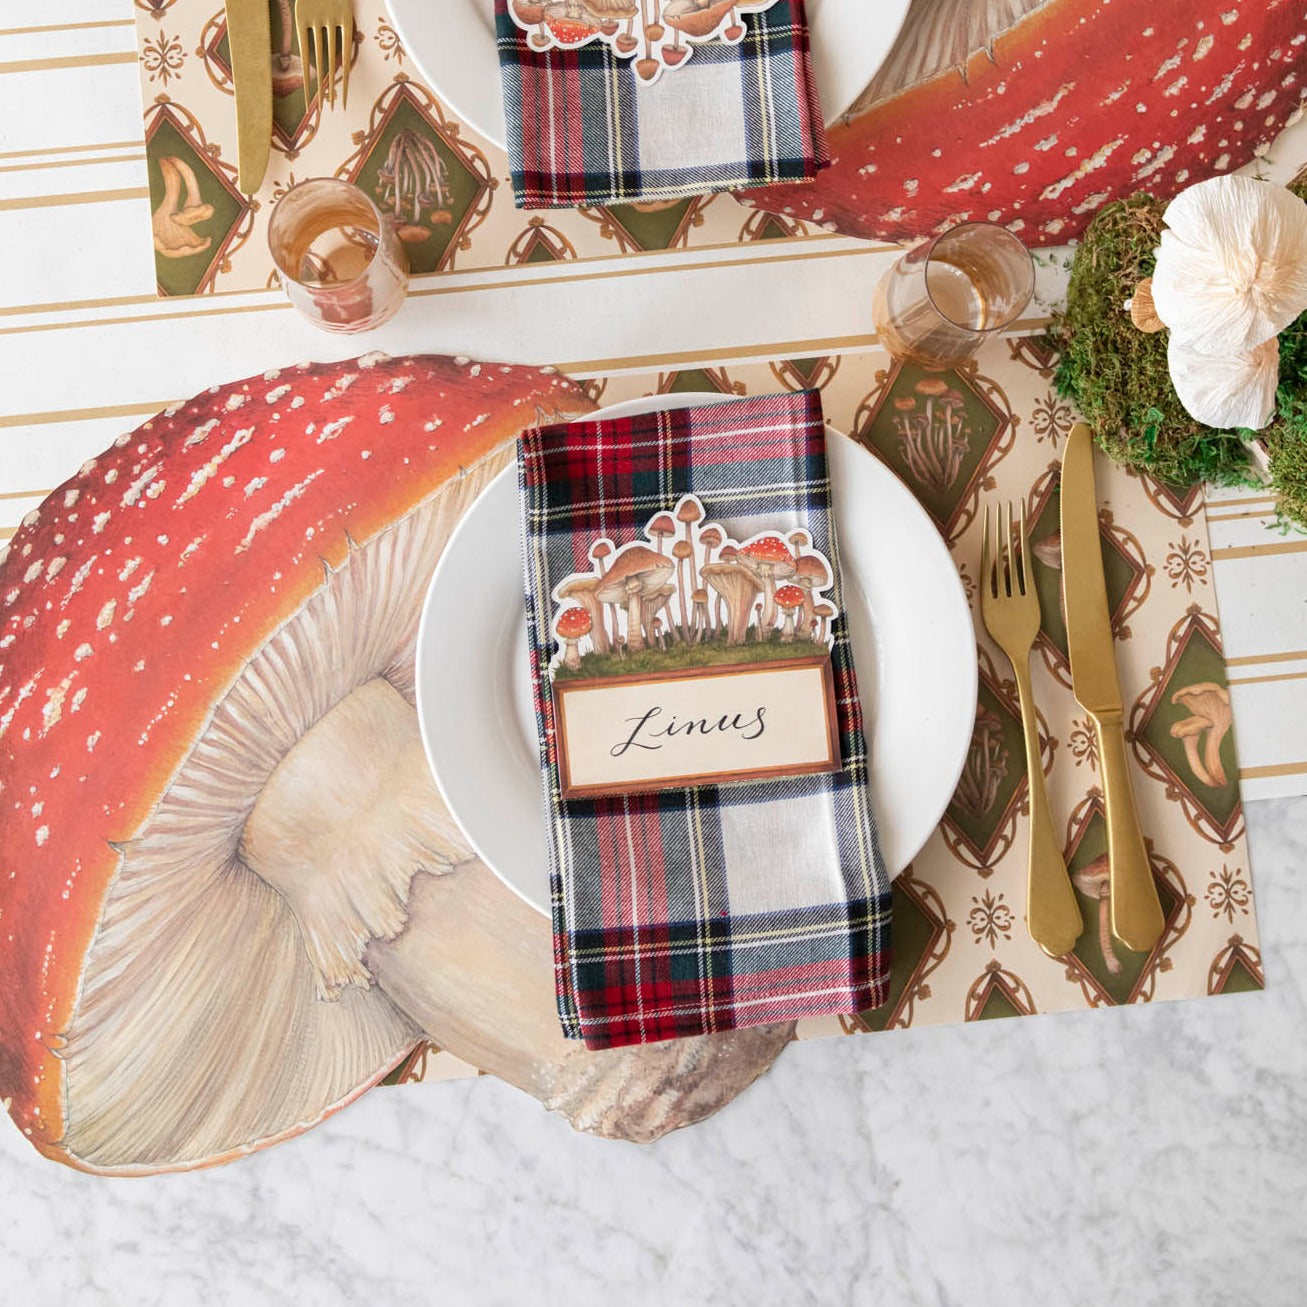 Styled table setting with mushroom placemats and place card on a napkin